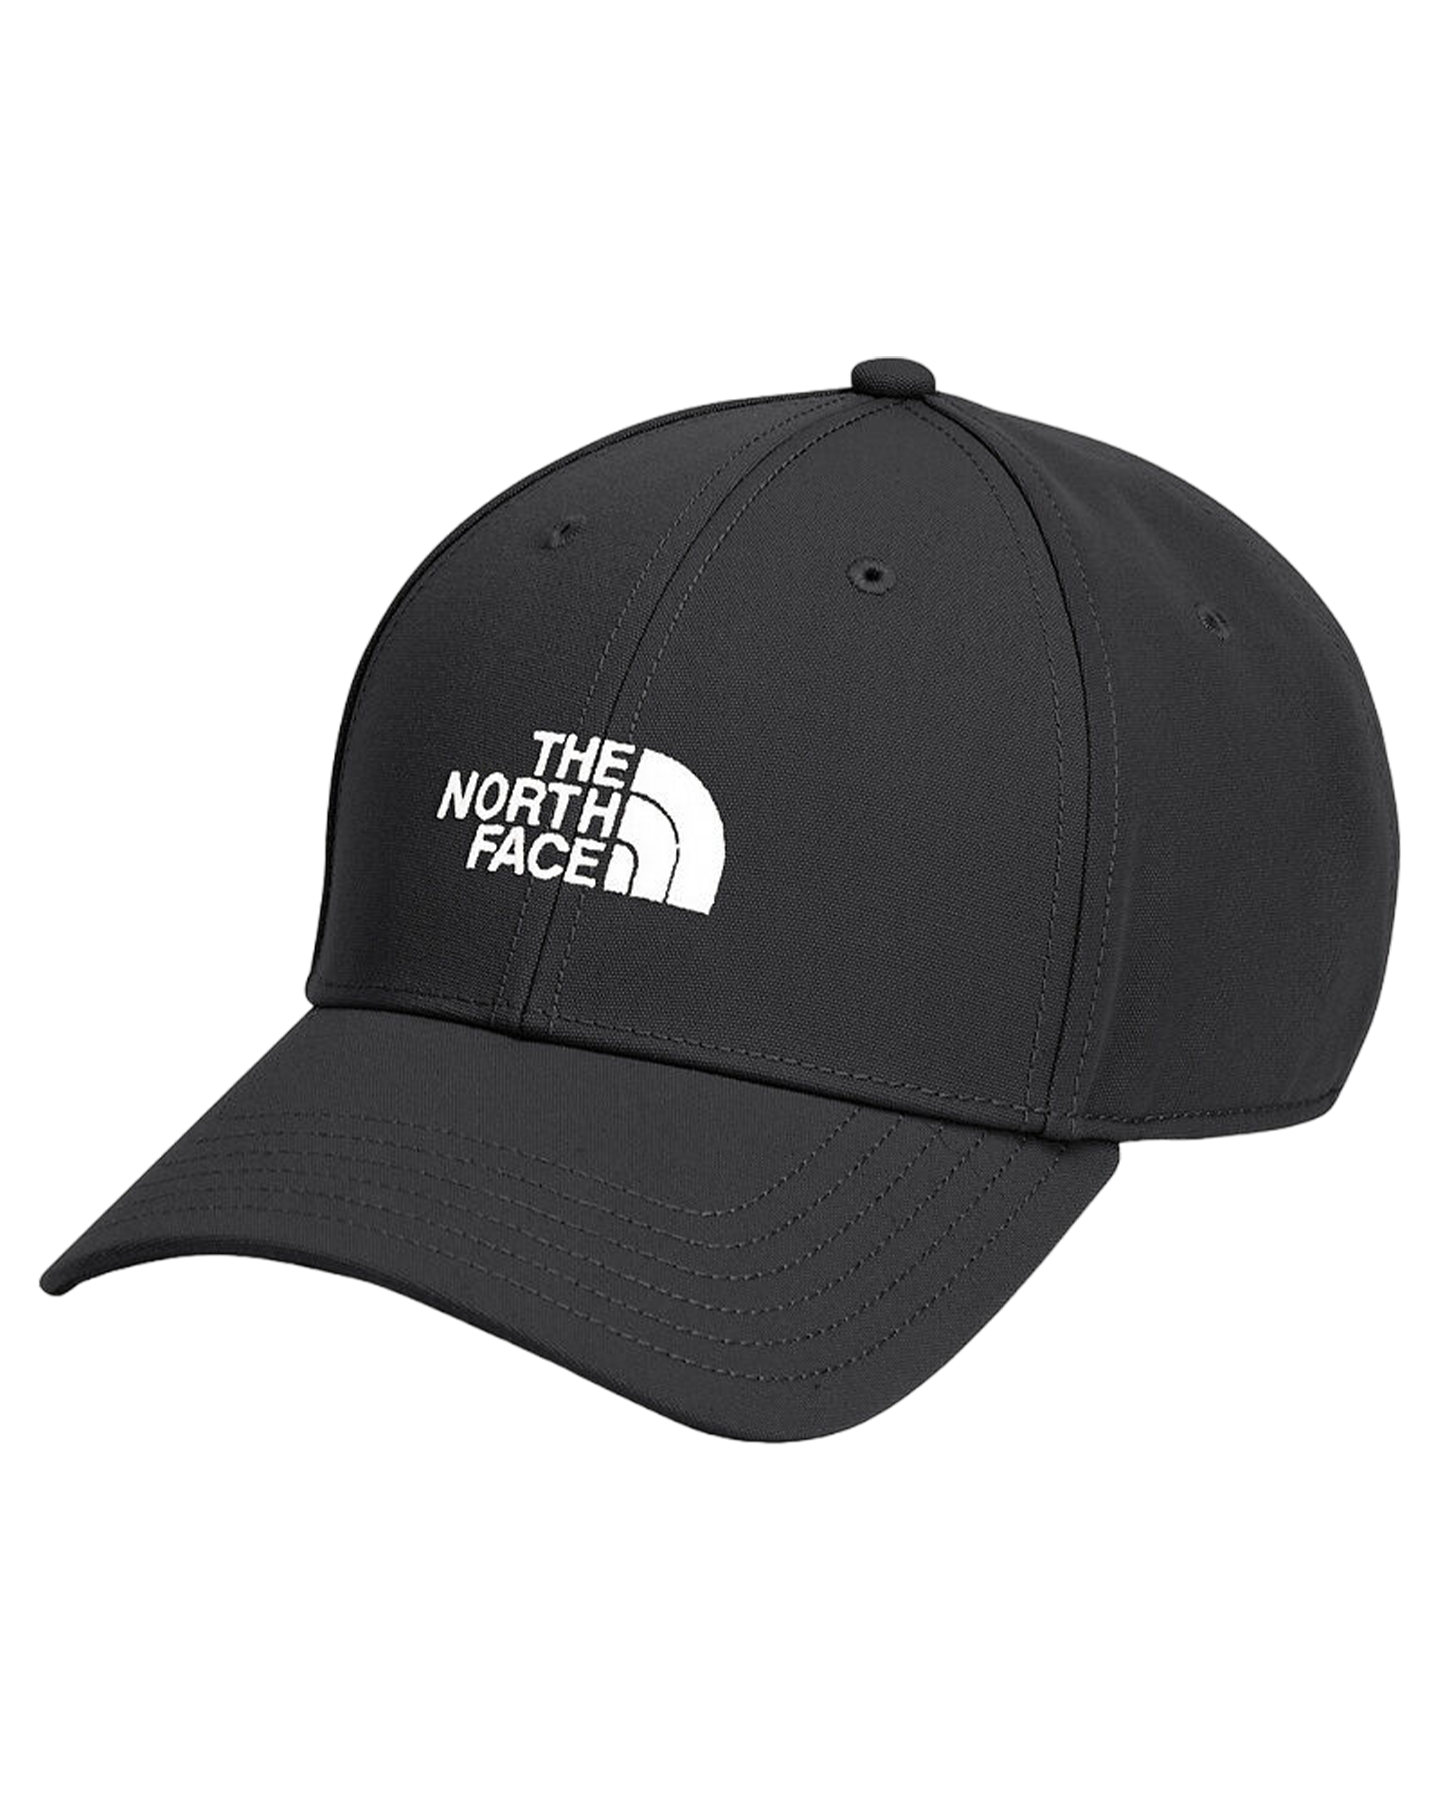 The North Face Recycled 66 Classic Hat - TNF Black / TNF White Hats - Trojan Wake Ski Snow